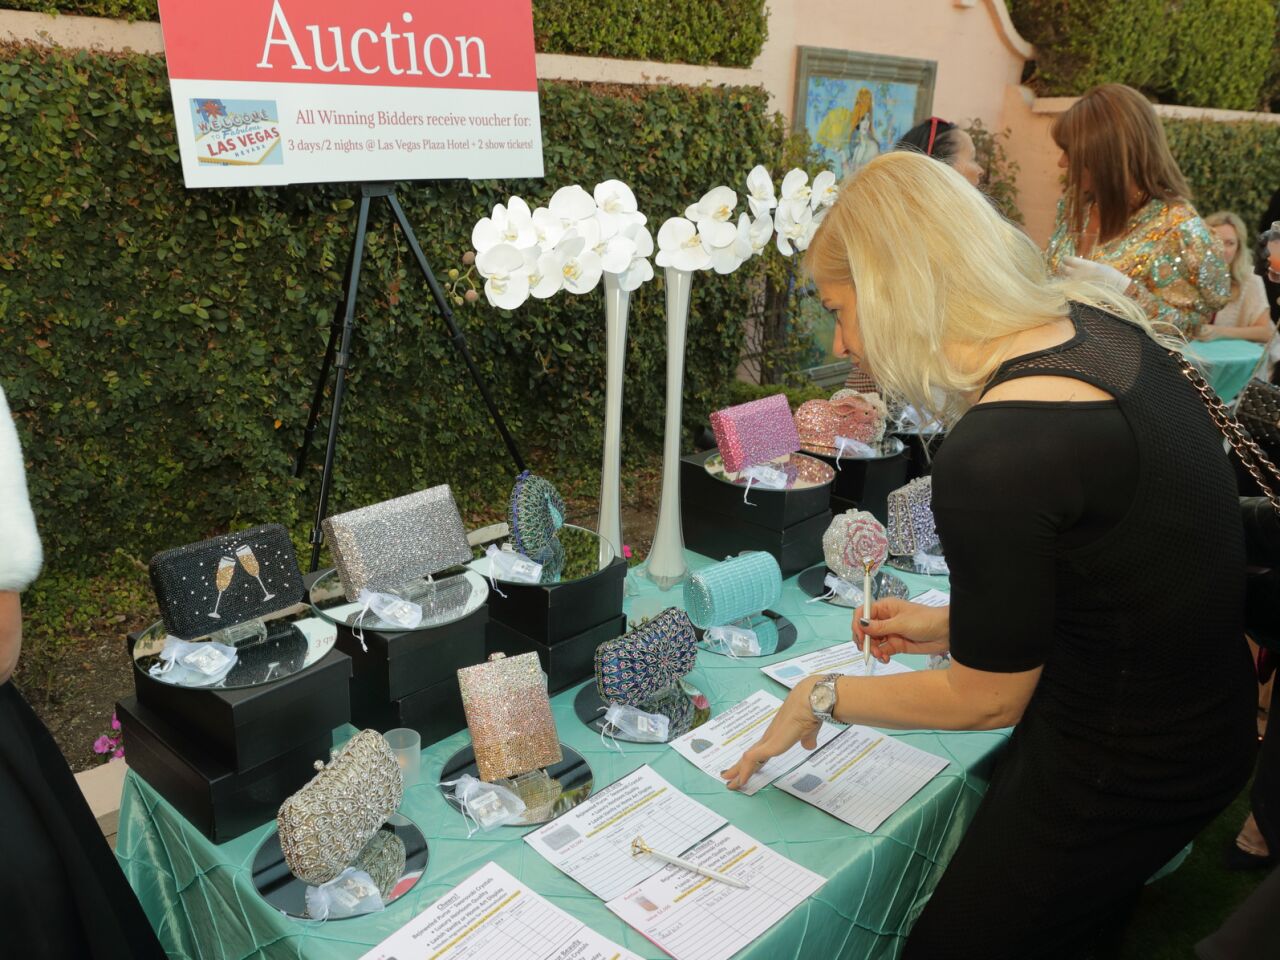 Guests review the silent auction items